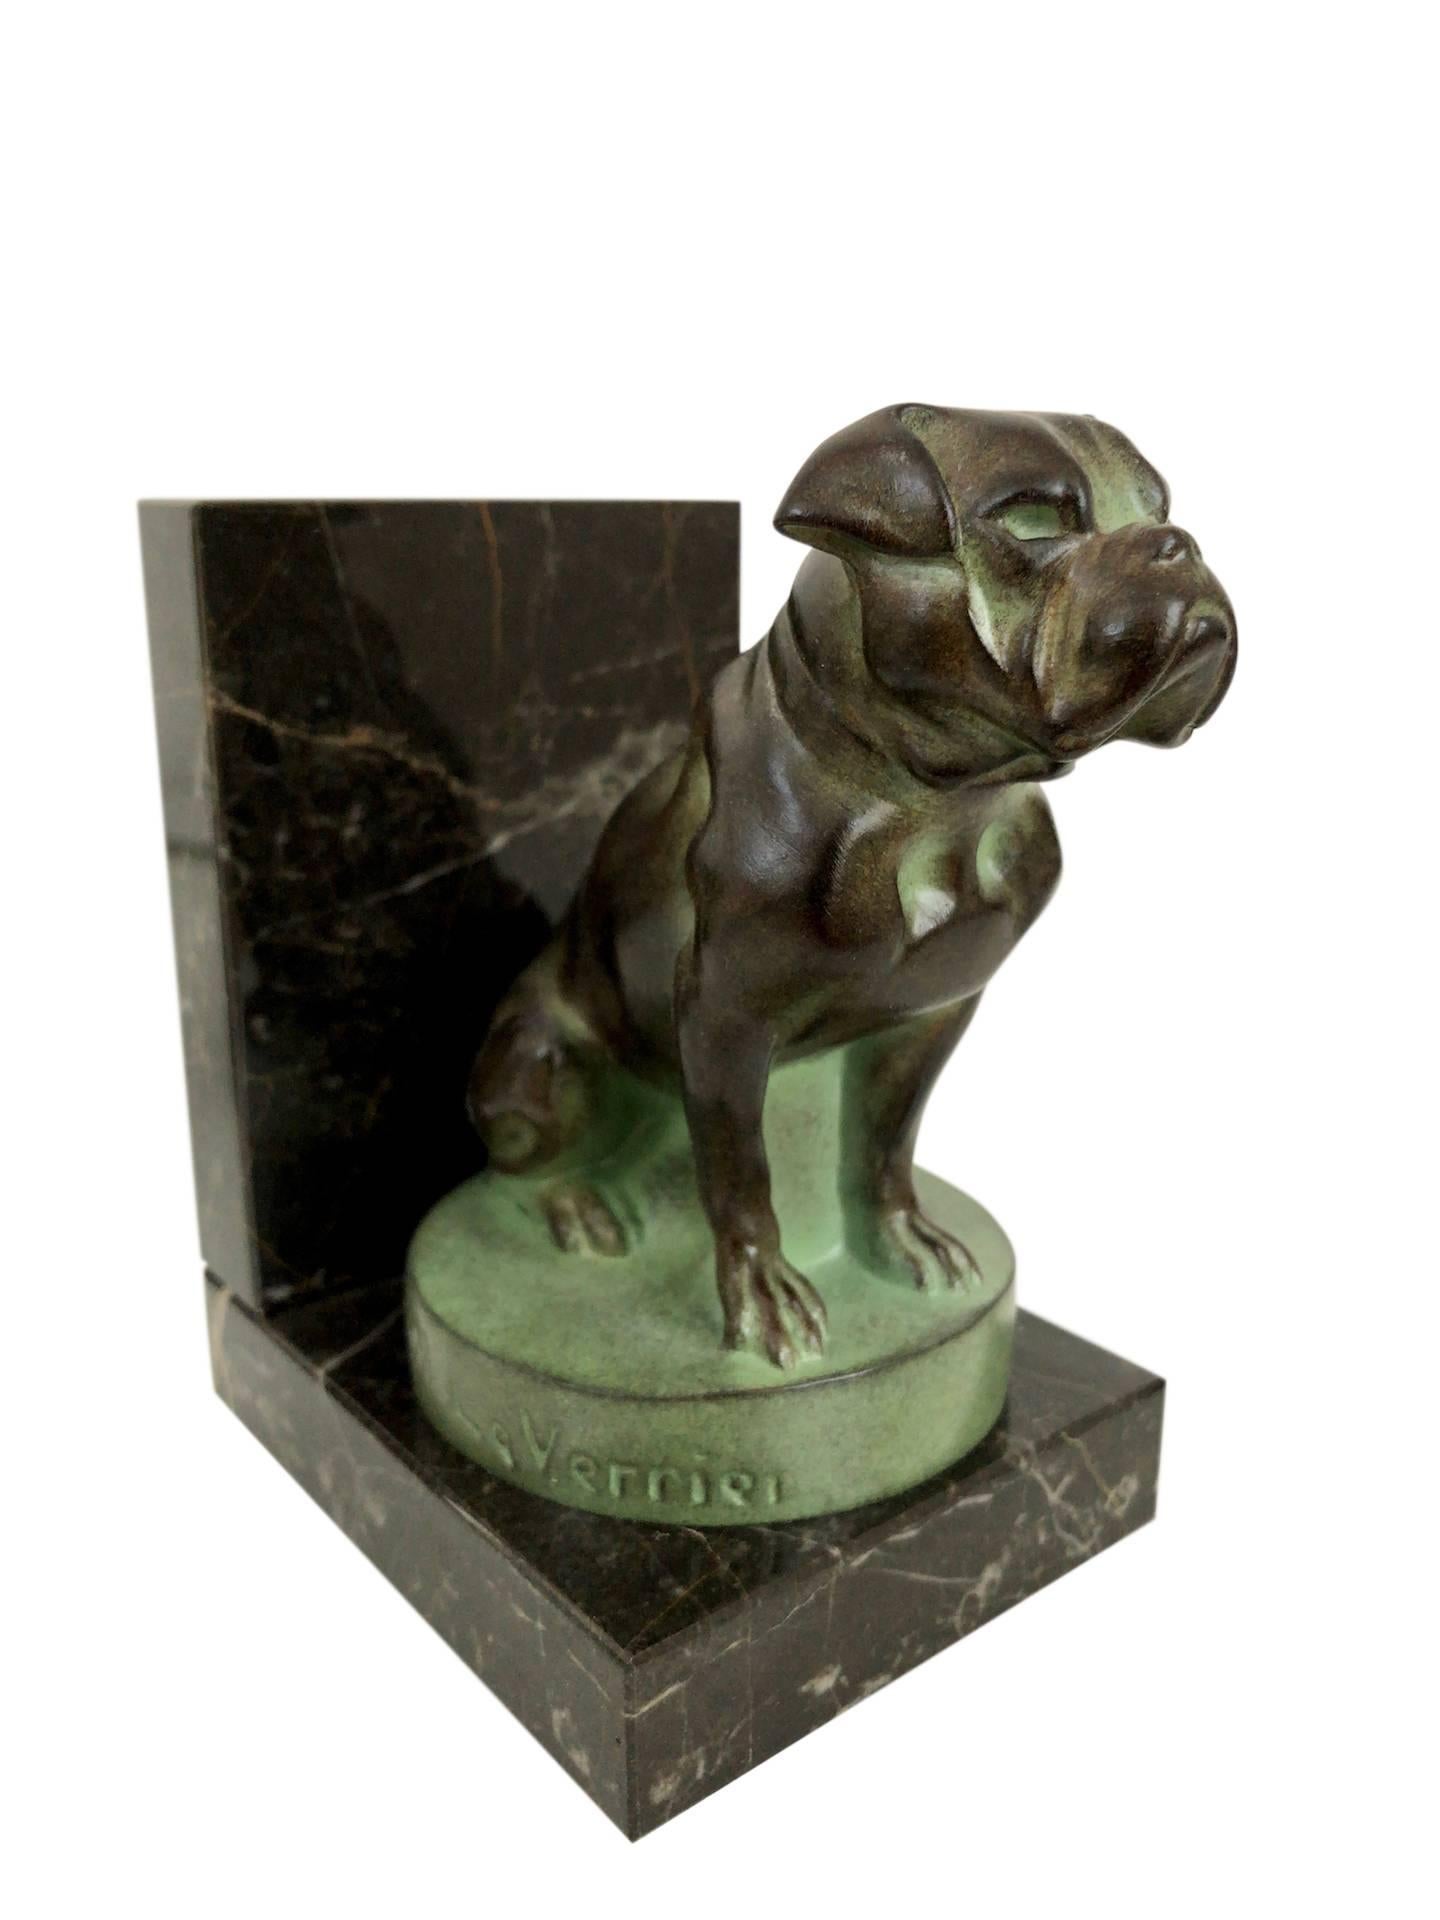 French Art Deco Bookends, Chat et Dogue, Cat and Dog, Original Max Le Verrier